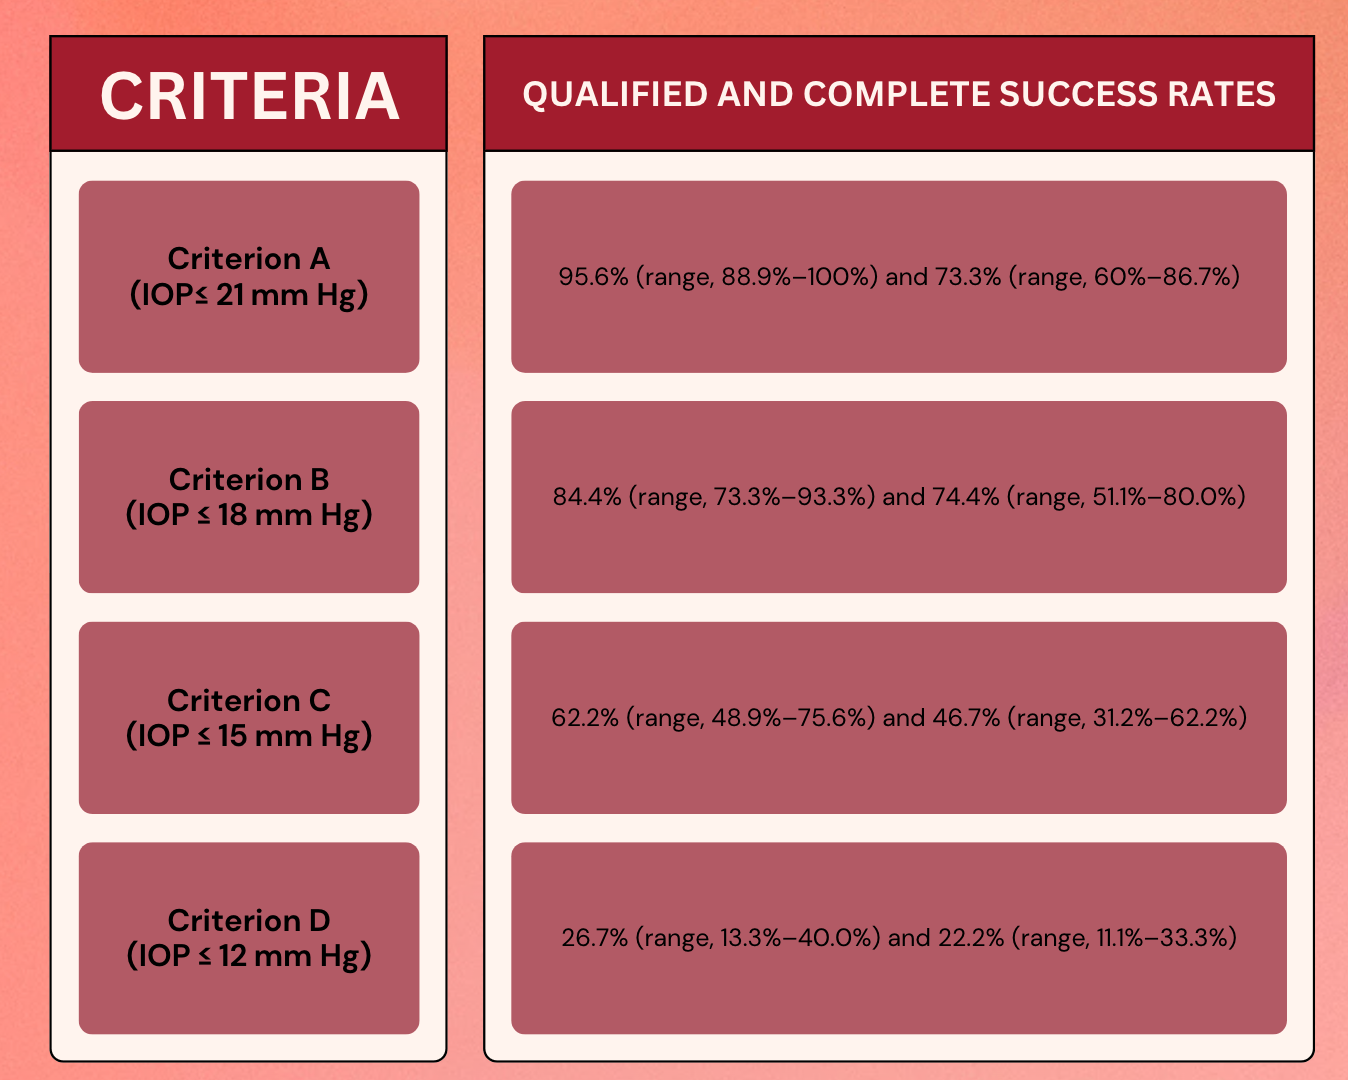 A table which includes the following data: Criterion A (IOP≤ 21 mm Hg), 95.6% (range, 88.9%–100%) and 73.3% (range, 60%–86.7%) Criterion B (IOP ≤ 18 mm Hg), 84.4% (range, 73.3%–93.3%) and 74.4% (range, 51.1%–80.0%) Criterion C (IOP ≤ 15 mm Hg), 62.2% (range, 48.9%–75.6%) and 46.7% (range, 31.2%–62.2%) Criterion D (IOP ≤ 12 mm Hg), 26.7% (range, 13.3%–40.0%) and 22.2% (range, 11.1%–33.3%)